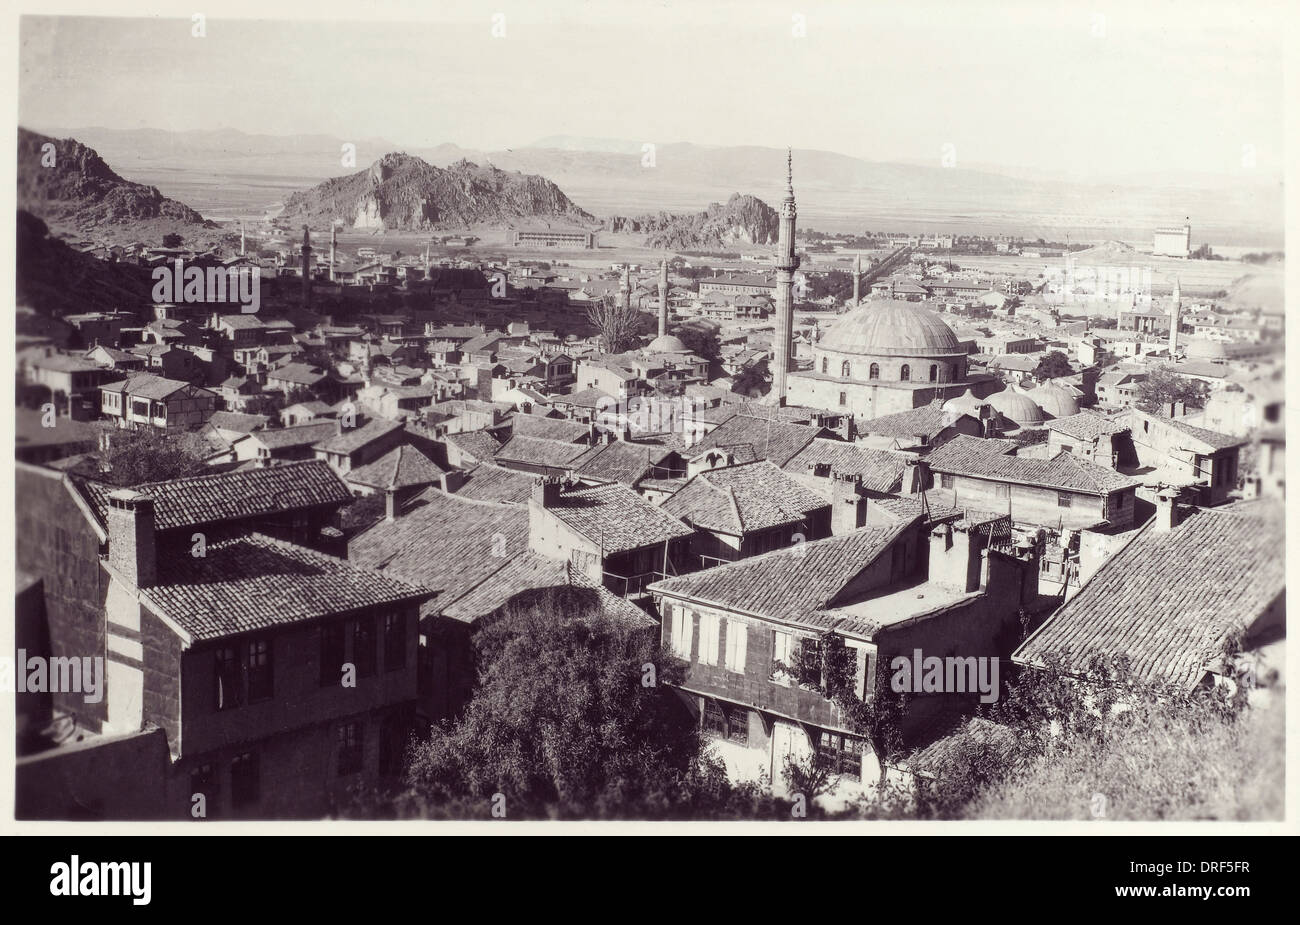 Panoramic view of Afyon, Turkey Stock Photo